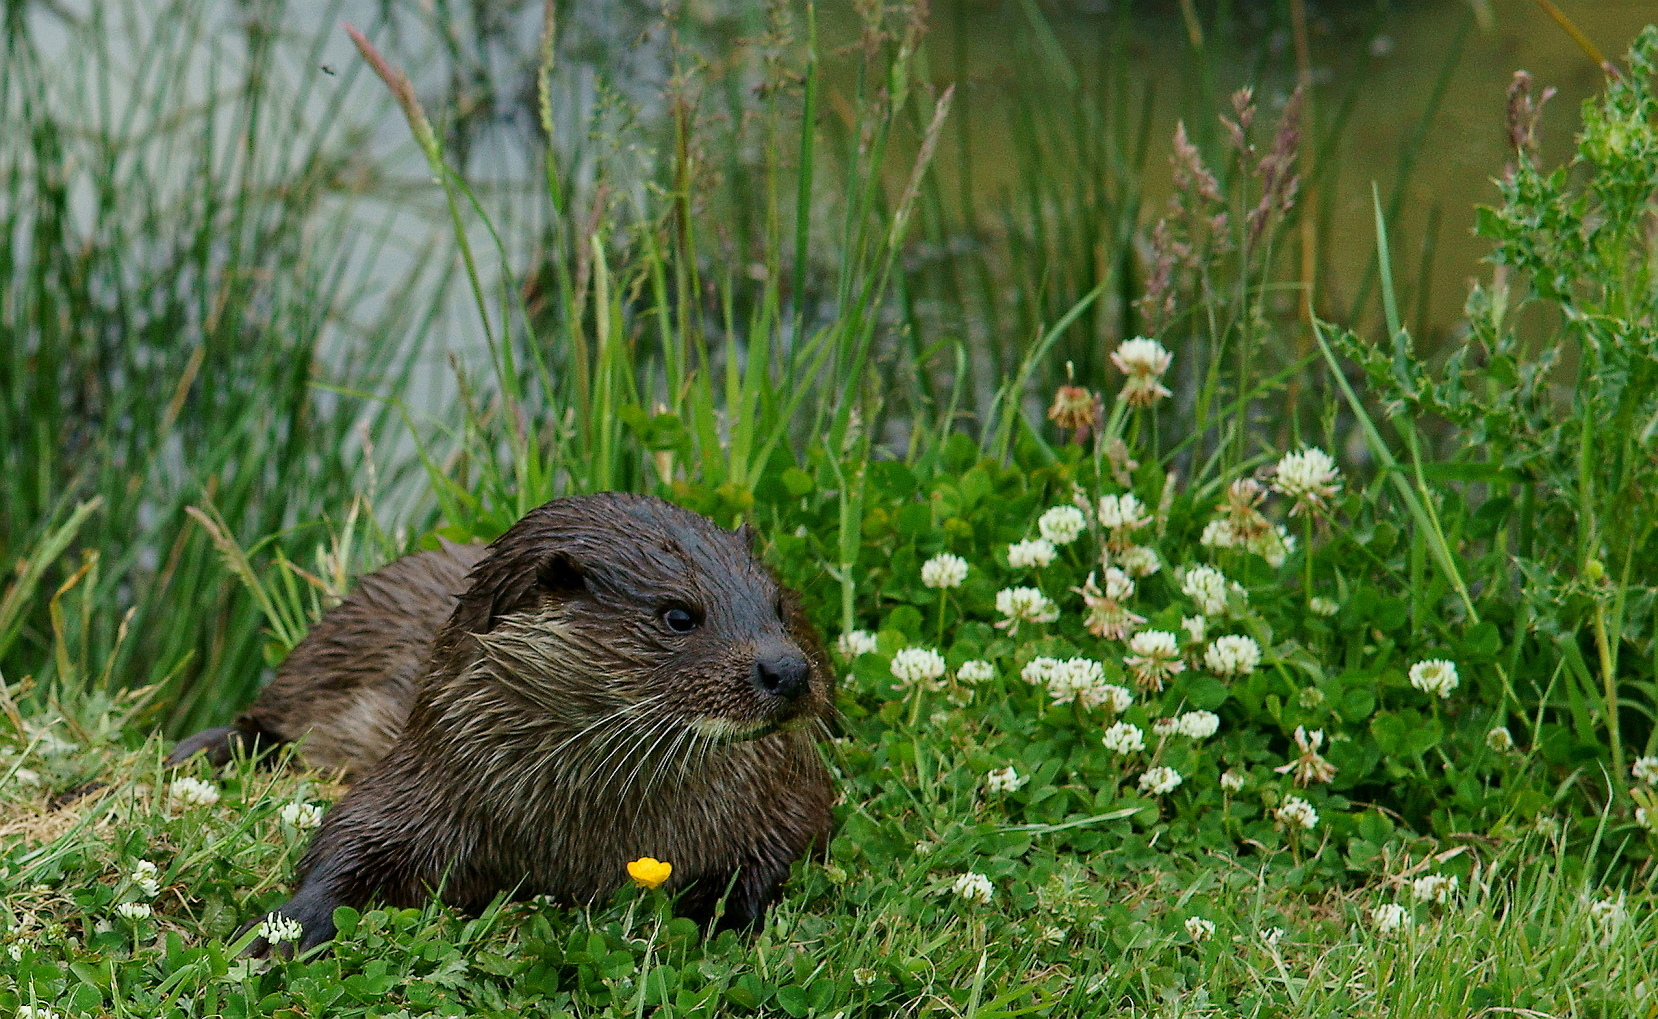 an image of a beaver sitting in grass